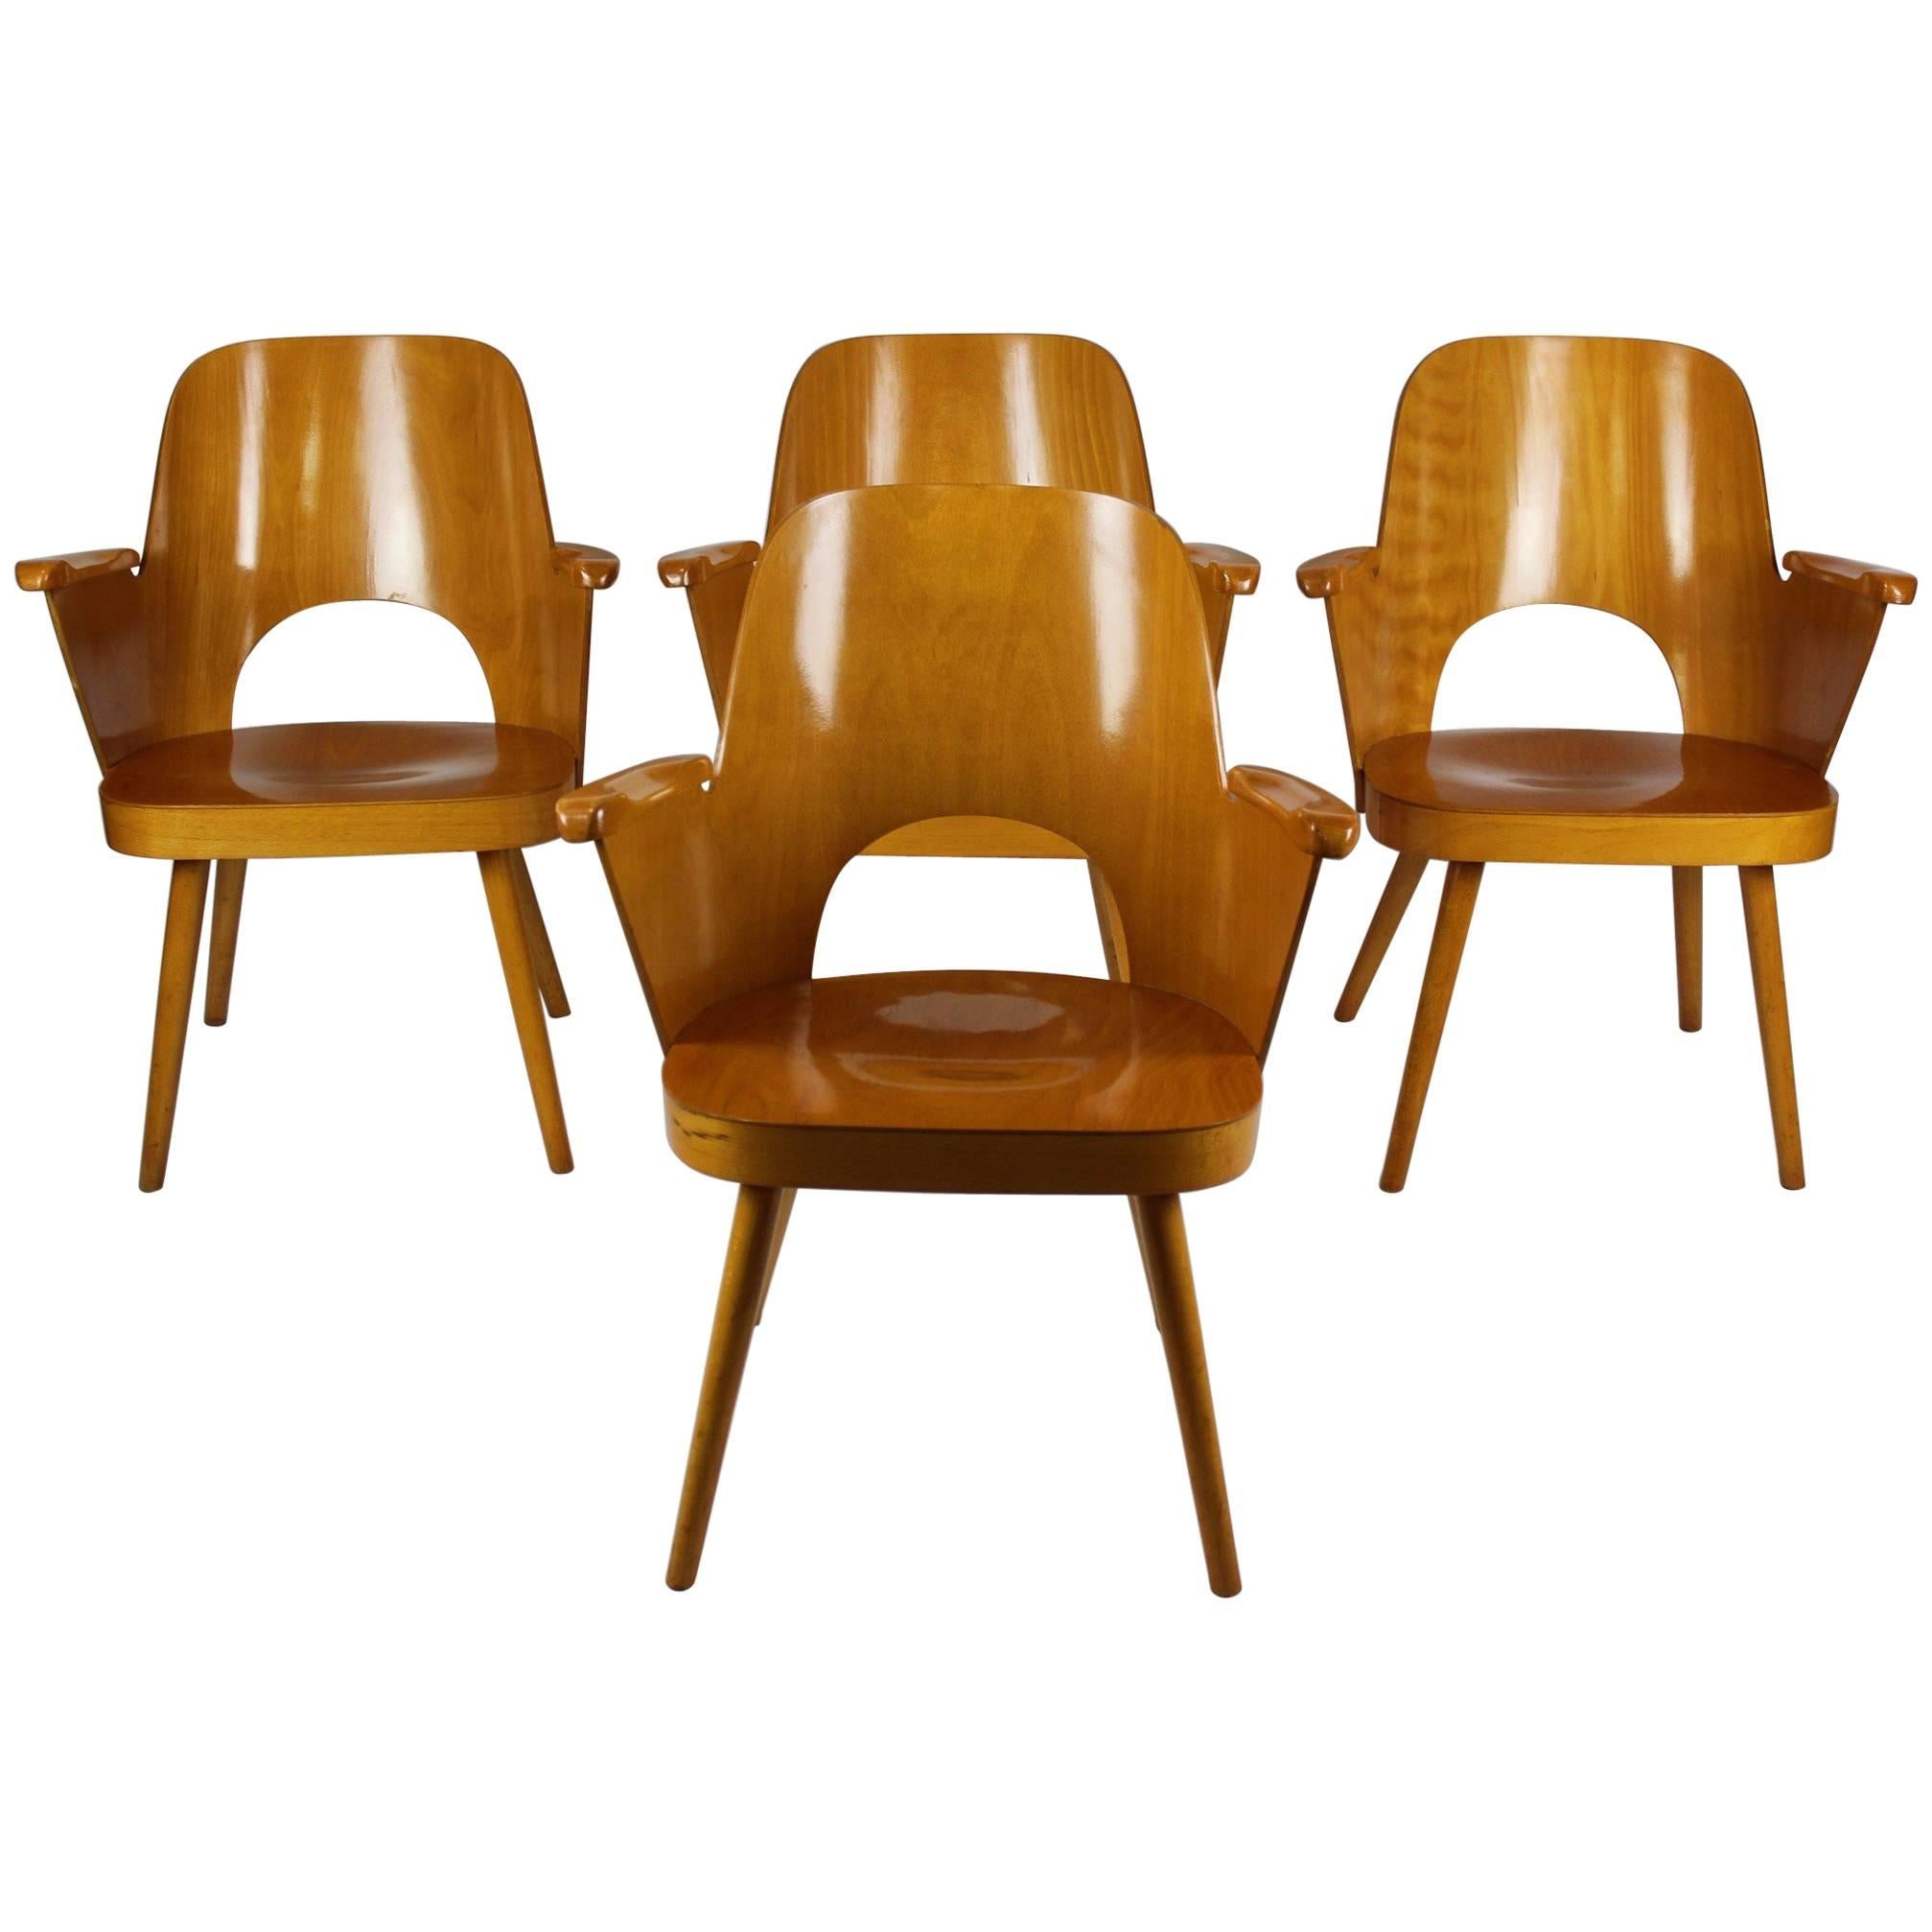 Midcentury Armchairs by Lubomír Hofmann for Ton/Thonet, 1961, Set of Four